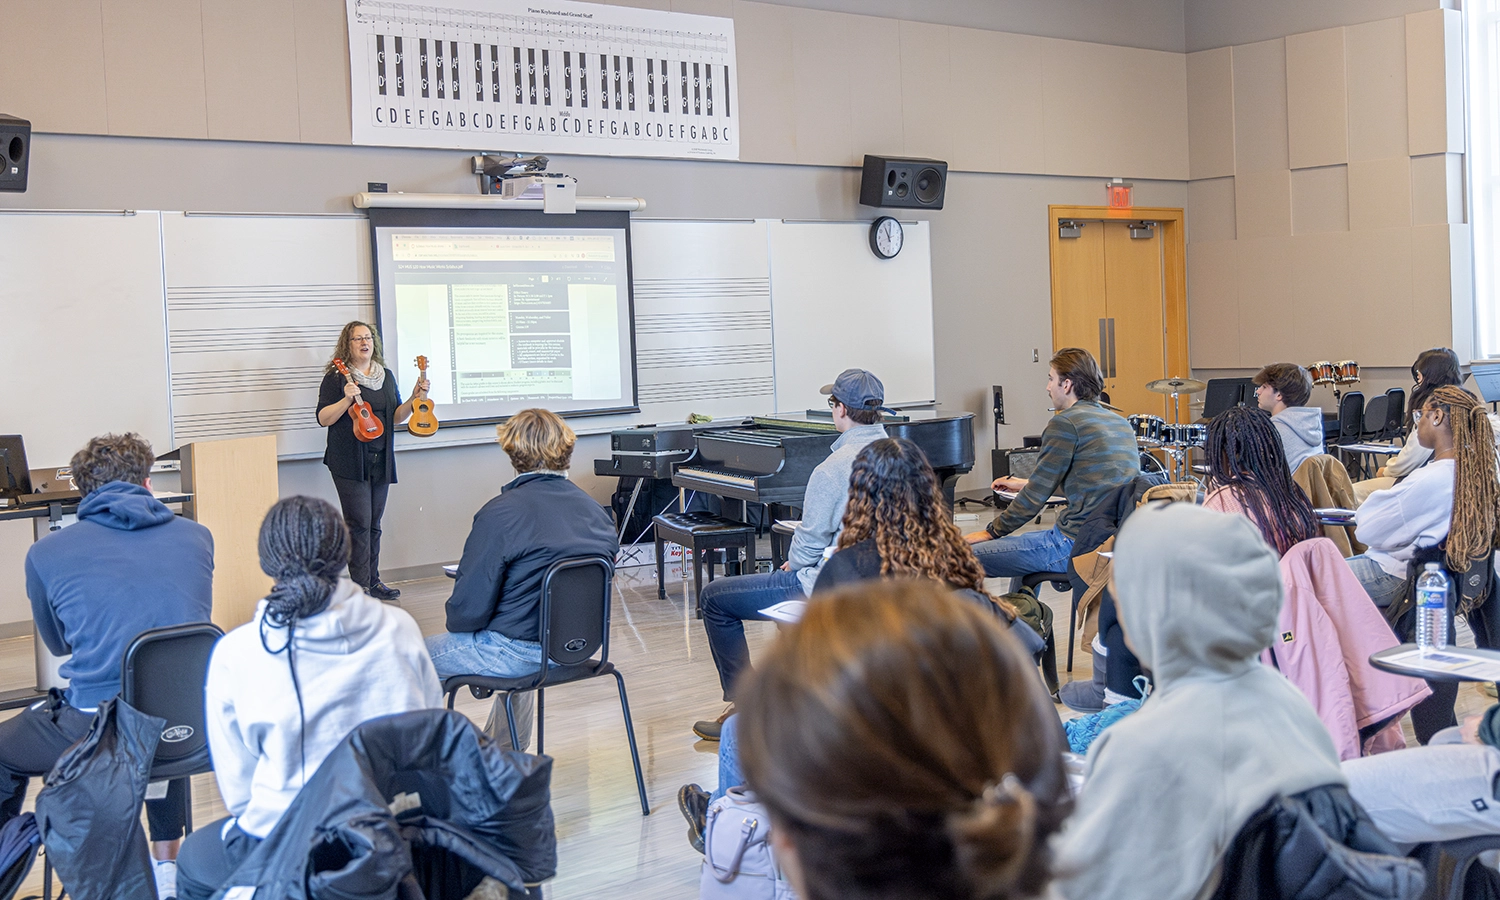 Associate Professor of Music Charity Lofthouse reviews ukuleles with students in the “How Music Works” course.